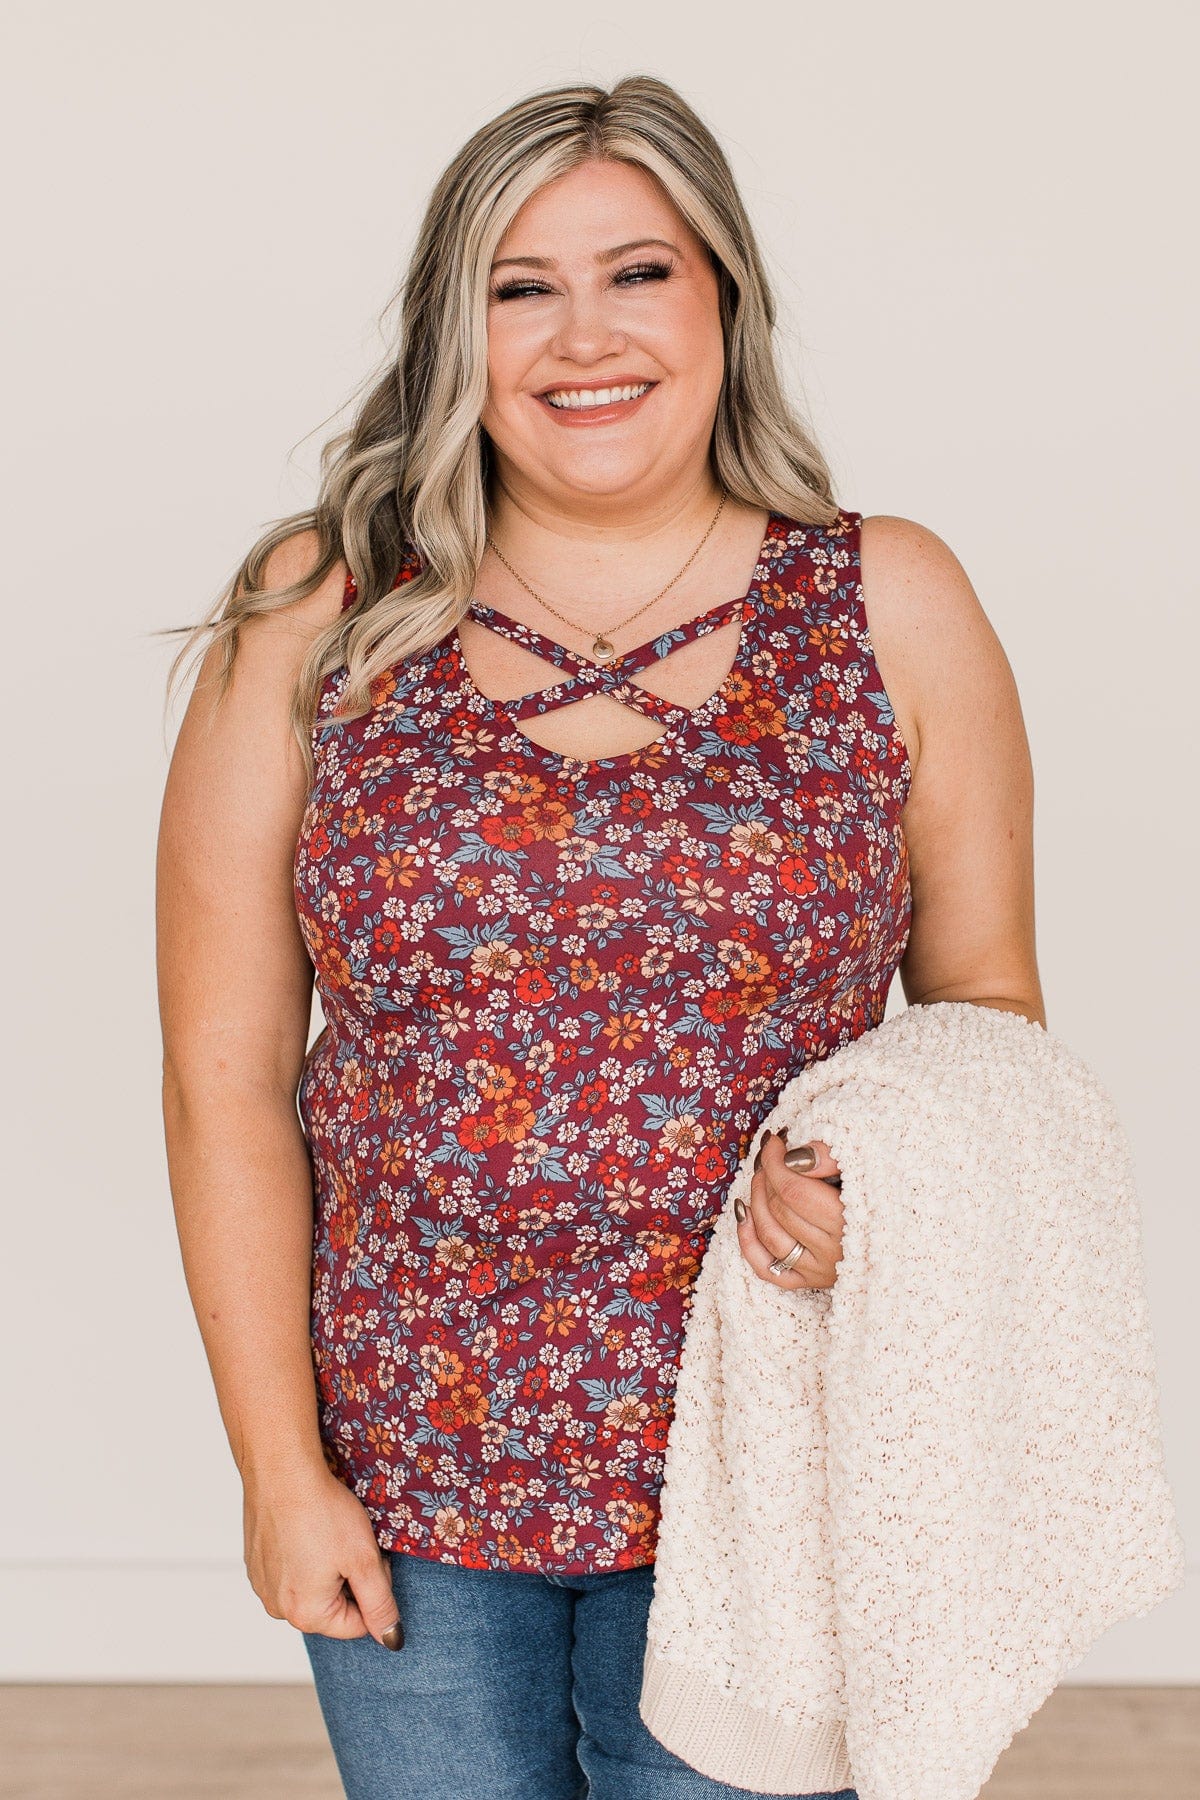 All About You Floral Tank Top- Burgundy